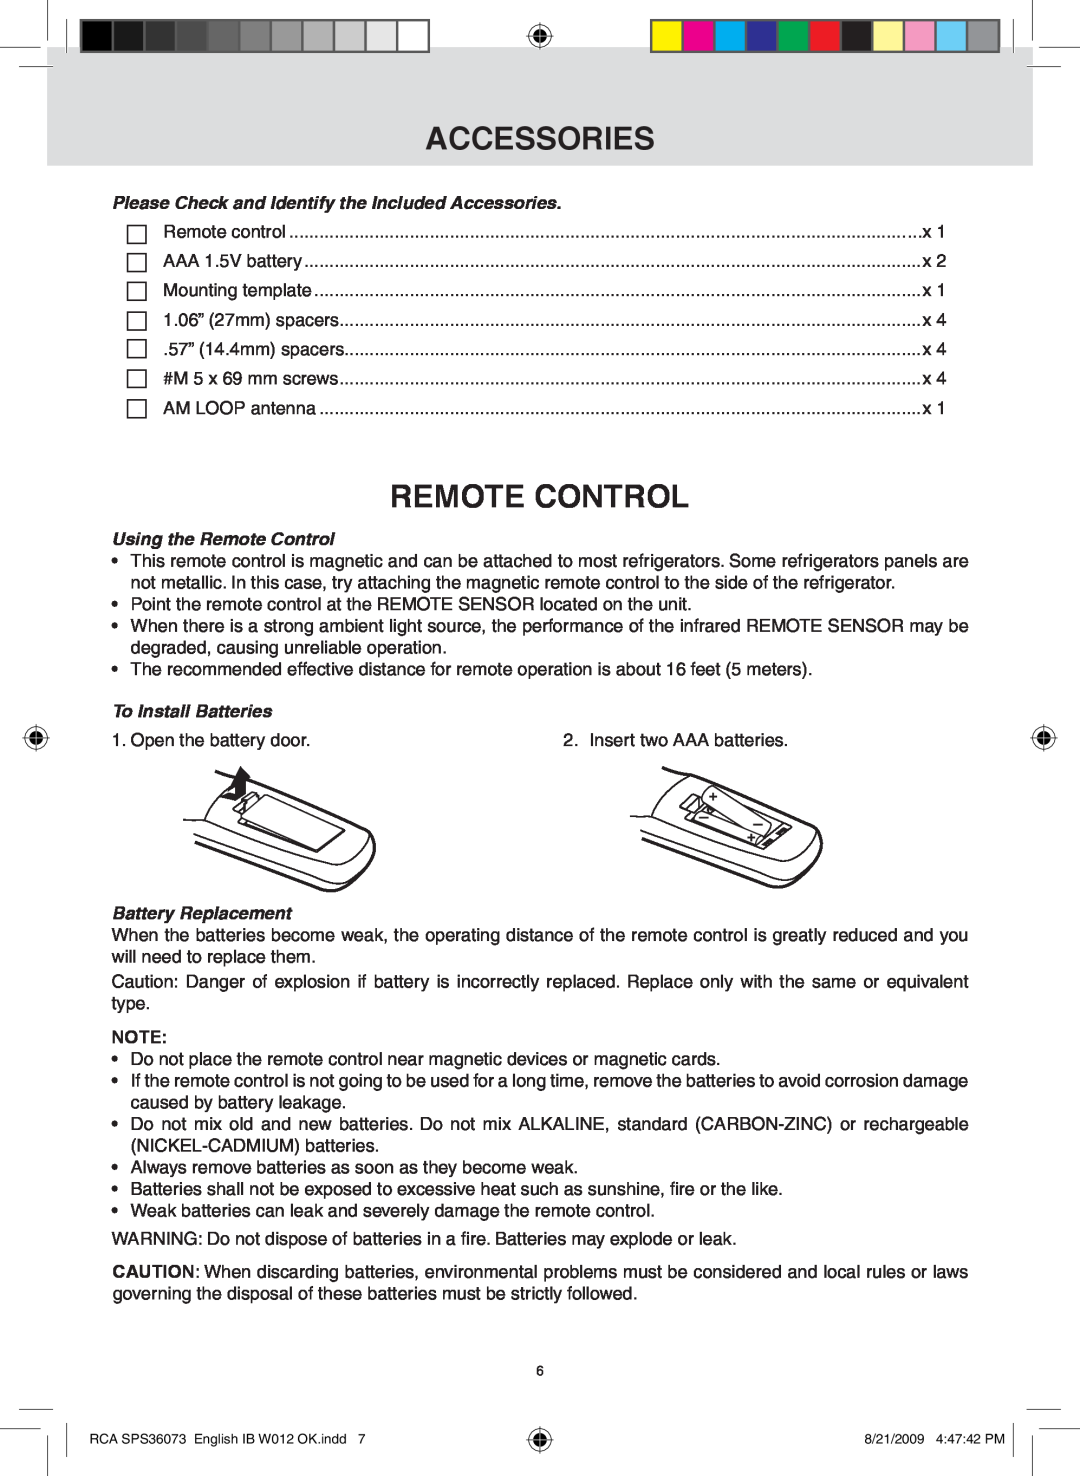 RCA SPS36073 remote control, Please check and identify the included accessories, Using the Remote Control, Accessories 